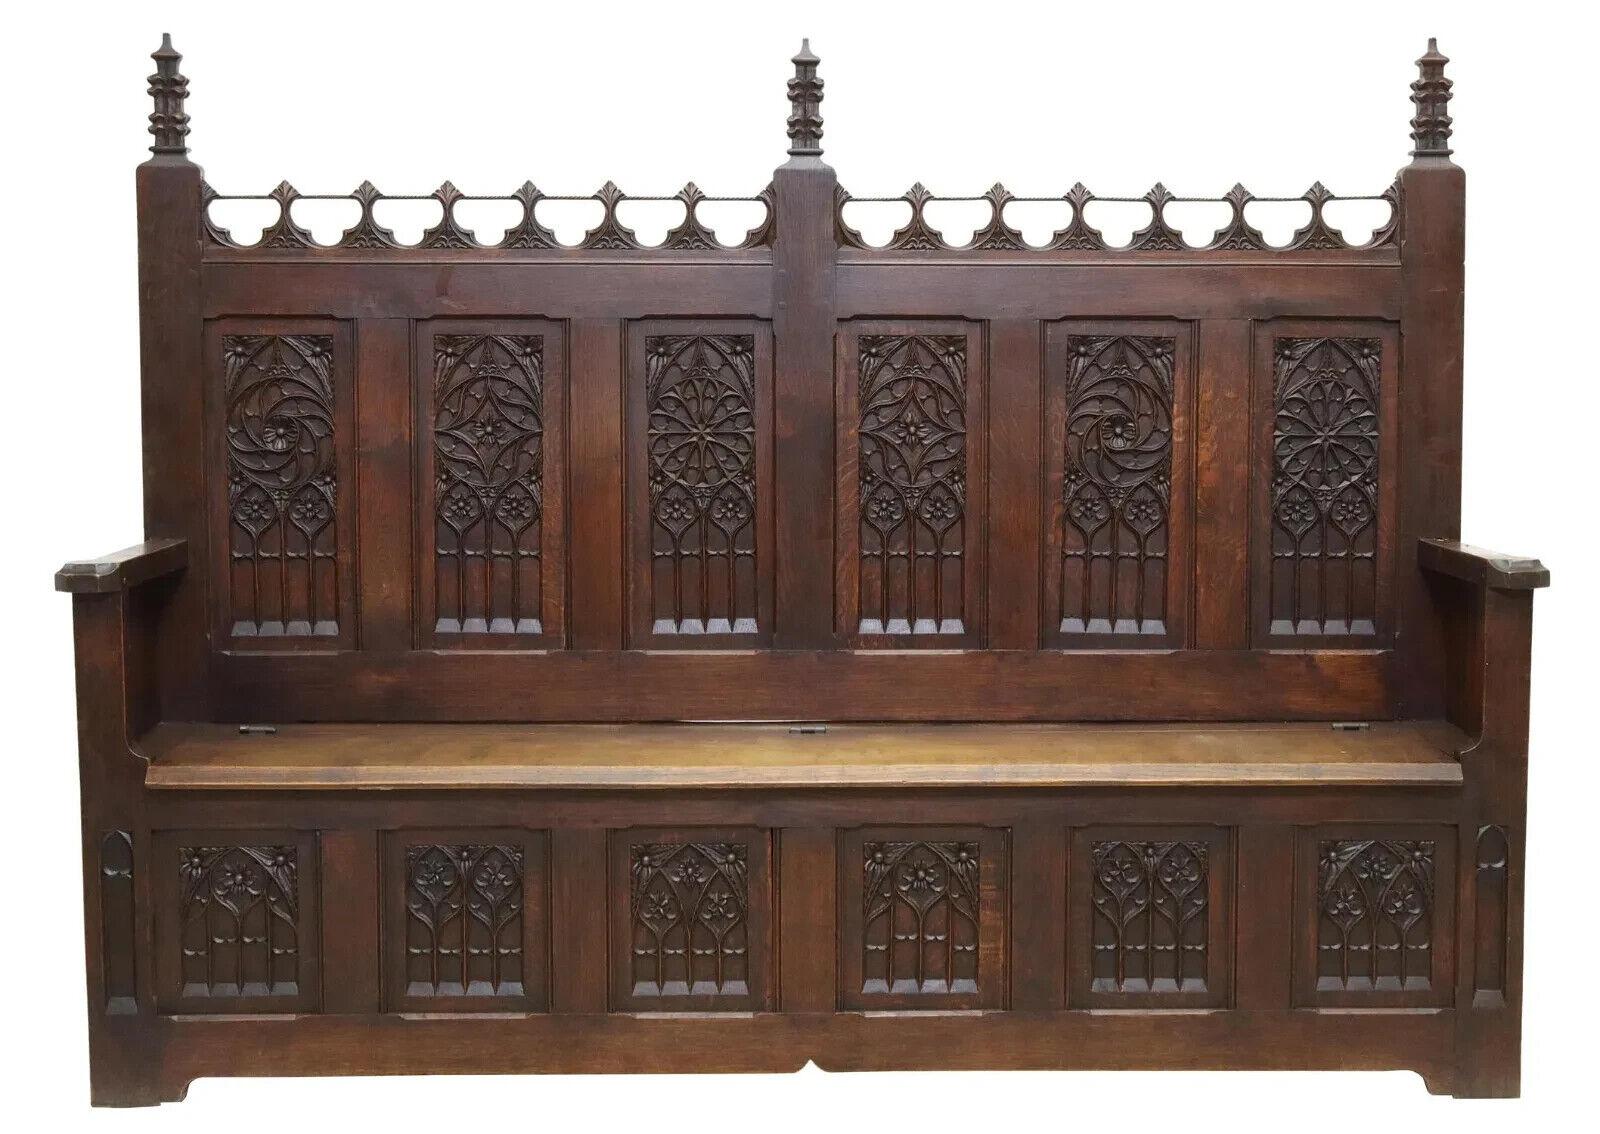 Gorgeous 1800's Antique French Gothic Revival, Carved Wood, Oak Hall Bench and Coffer!!

Stunning Antique Hall Bench, Coffer French Gothic Revival, Oak, 19th C,  1800s!!

This antique hall bench is a true masterpiece of French Gothic Revival style.